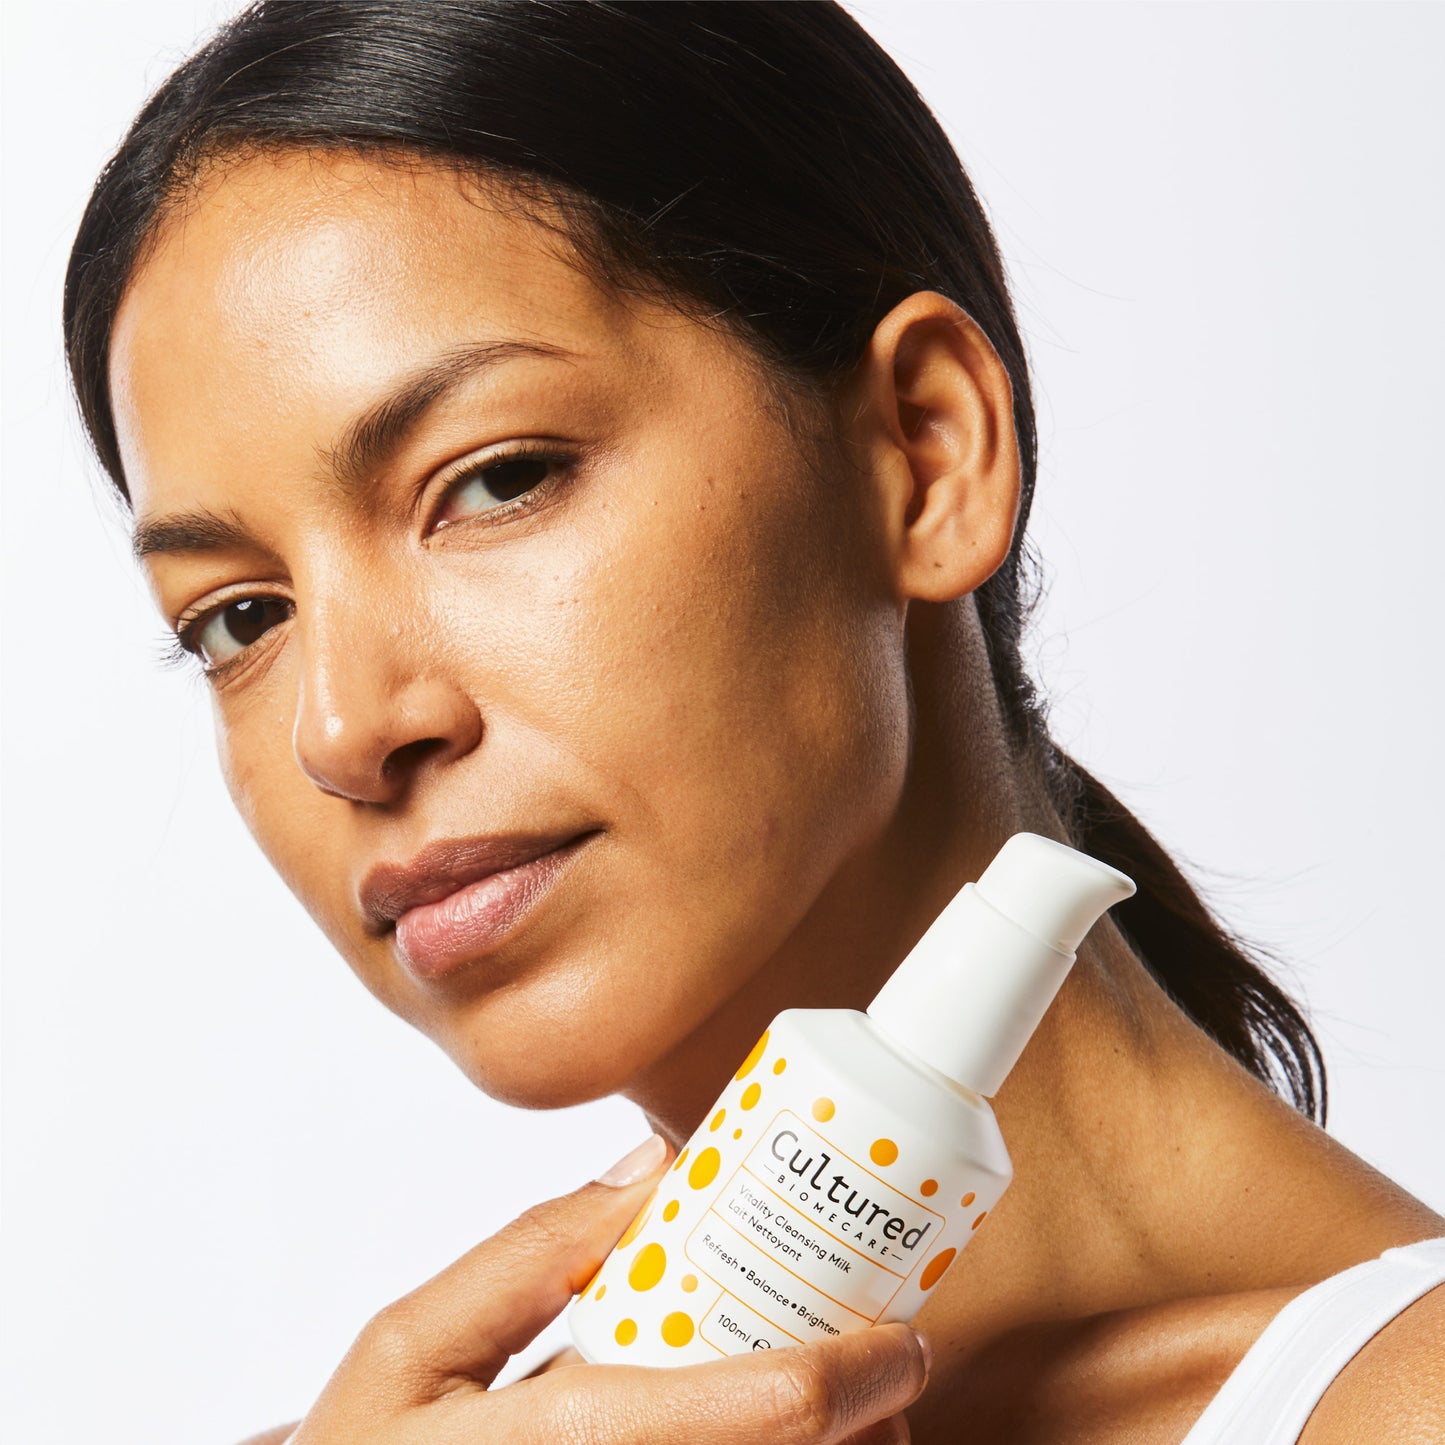 A close up headshot of a woman holding the Cleansing Milk next to her face.